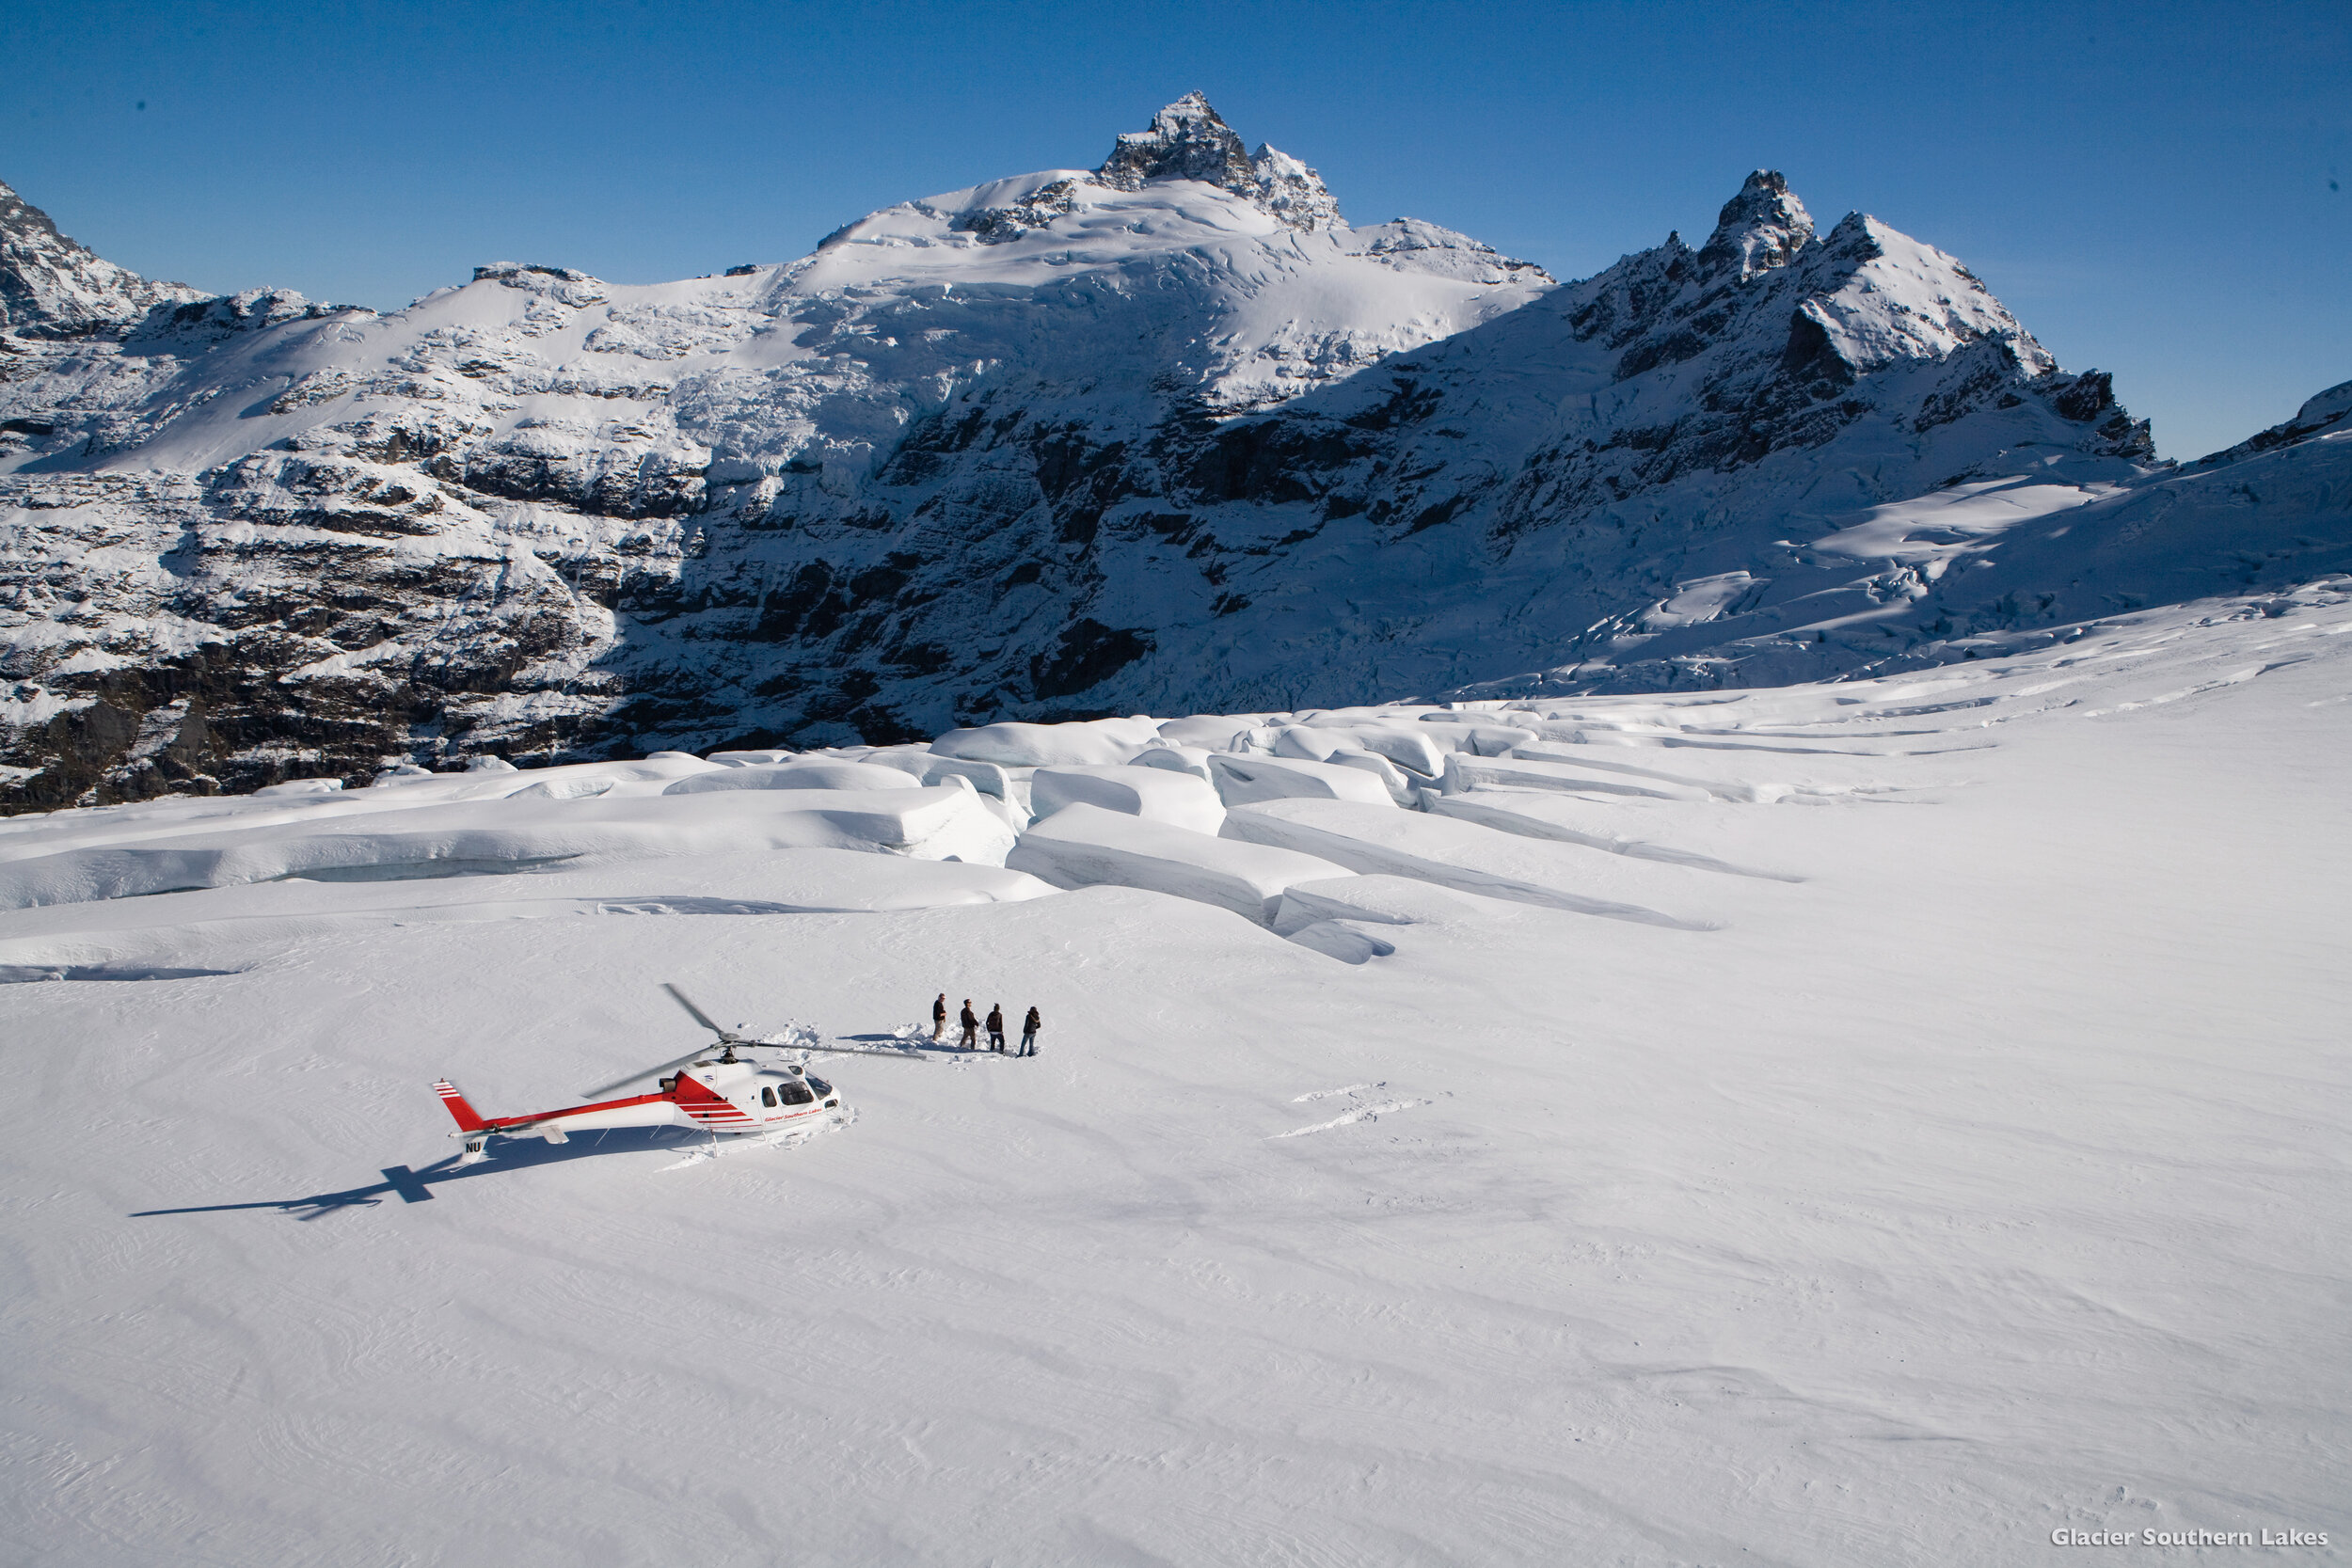 AD269-Clarke-Glacier-Queenstown-Glacier-Southern-Lakes-Helicopters.jpg